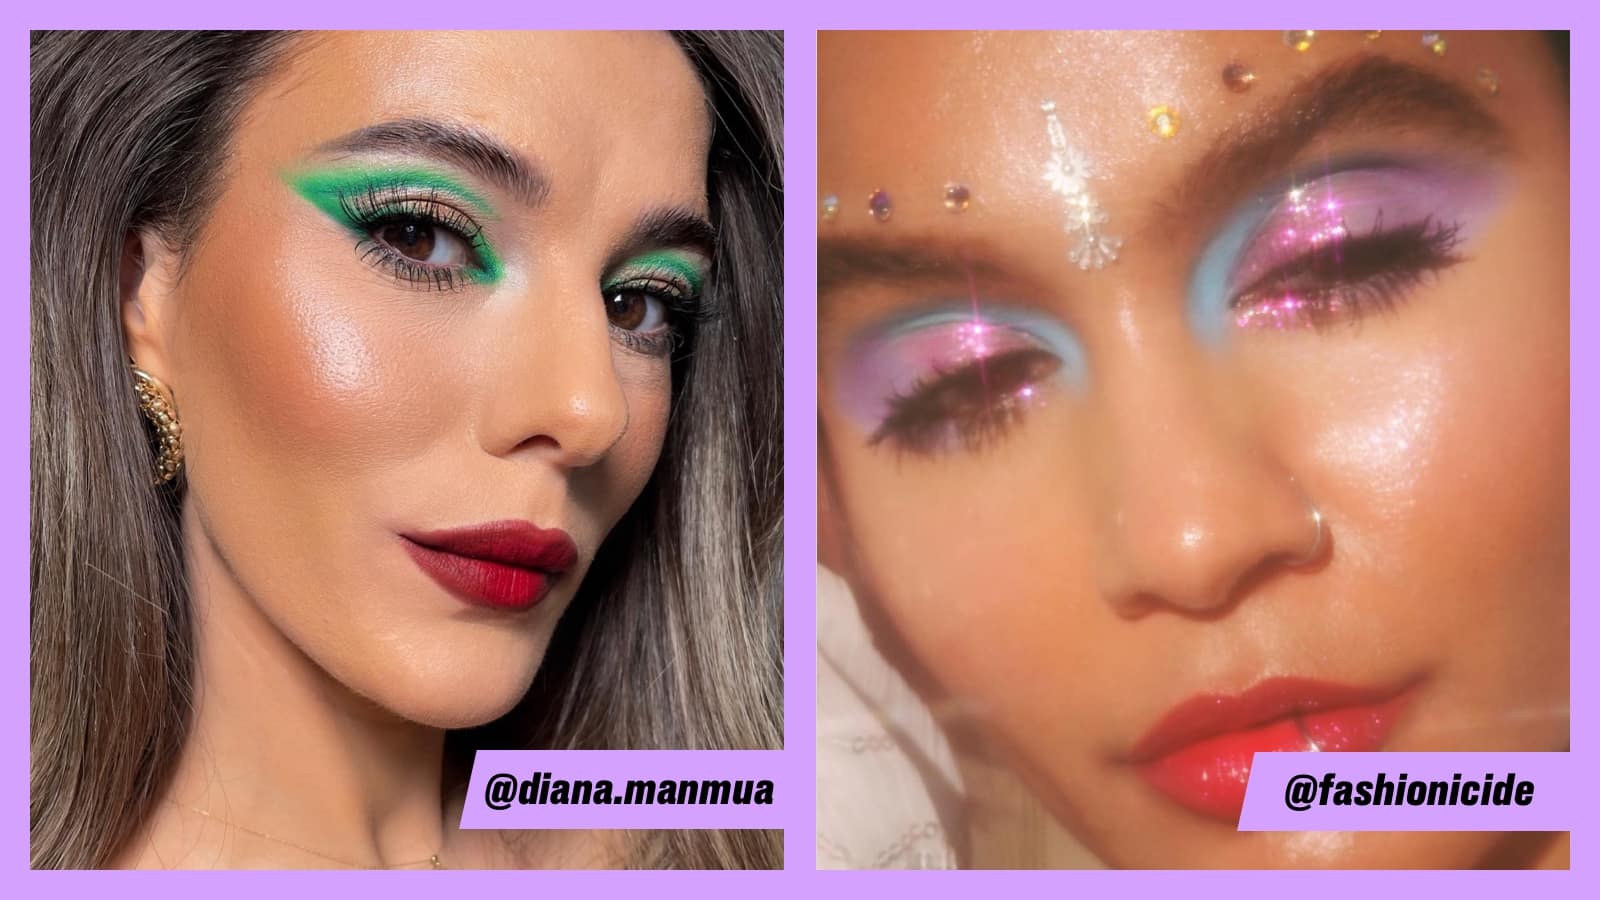 Themed Makeup Ideas for Your Next Party